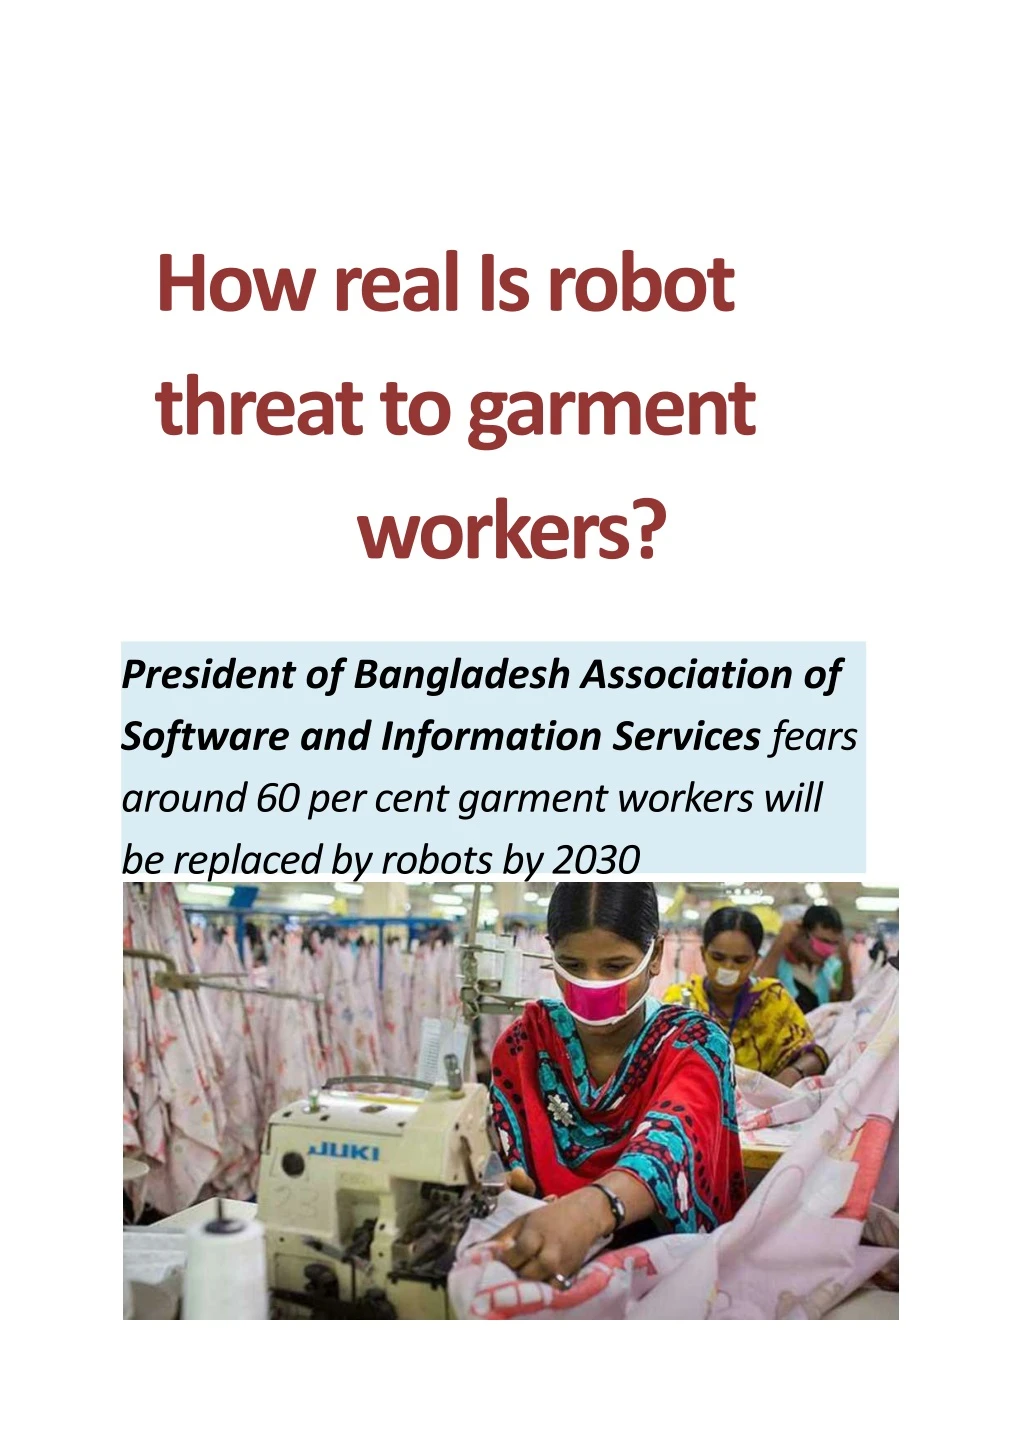 how real is robot threat to garment workers